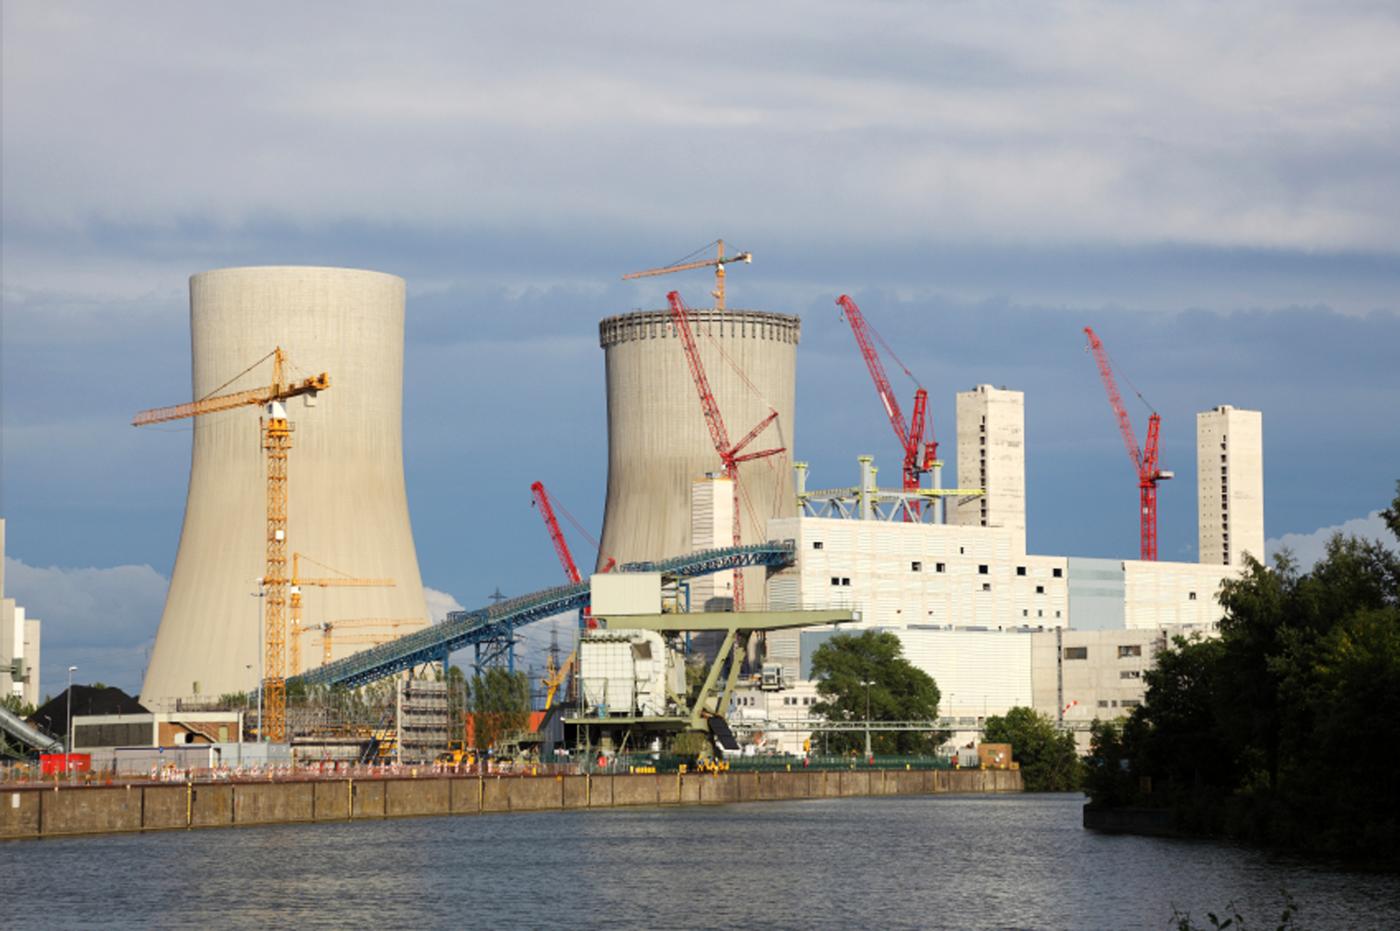 Construction of nuclear power plant cooling towers with water in foreground and cranes used in construction